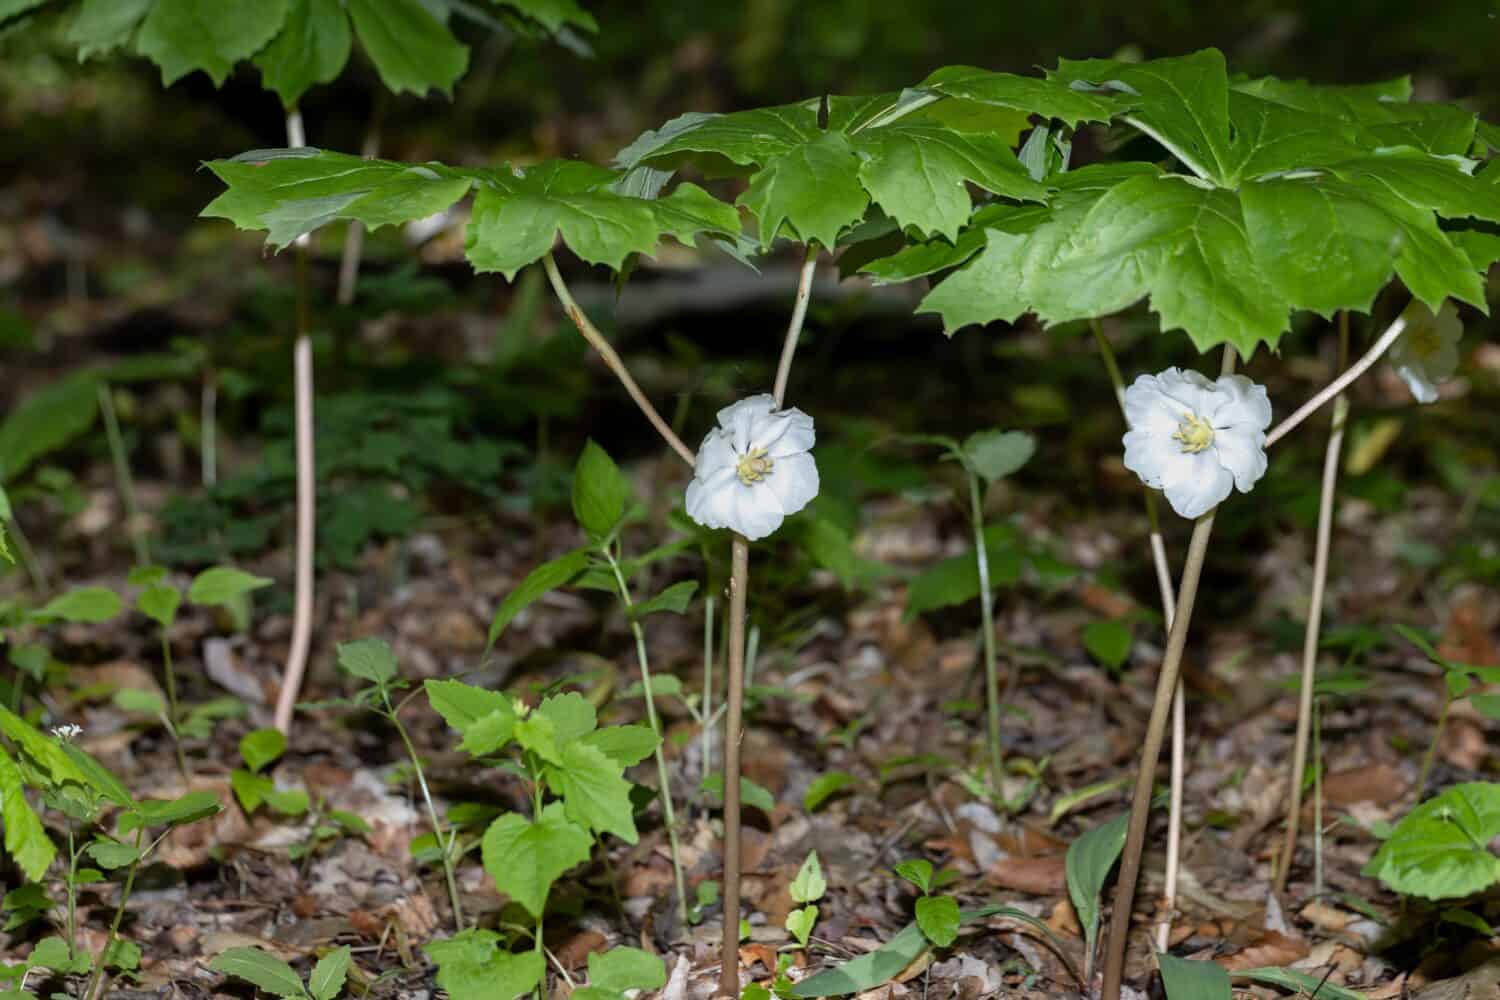 The Bloom Mayapple (Podophyllum peltatum) The native plants that grow in large colonies. These plants have an edible fruit and the Native Americans had medicinal uses for parts of this plant 